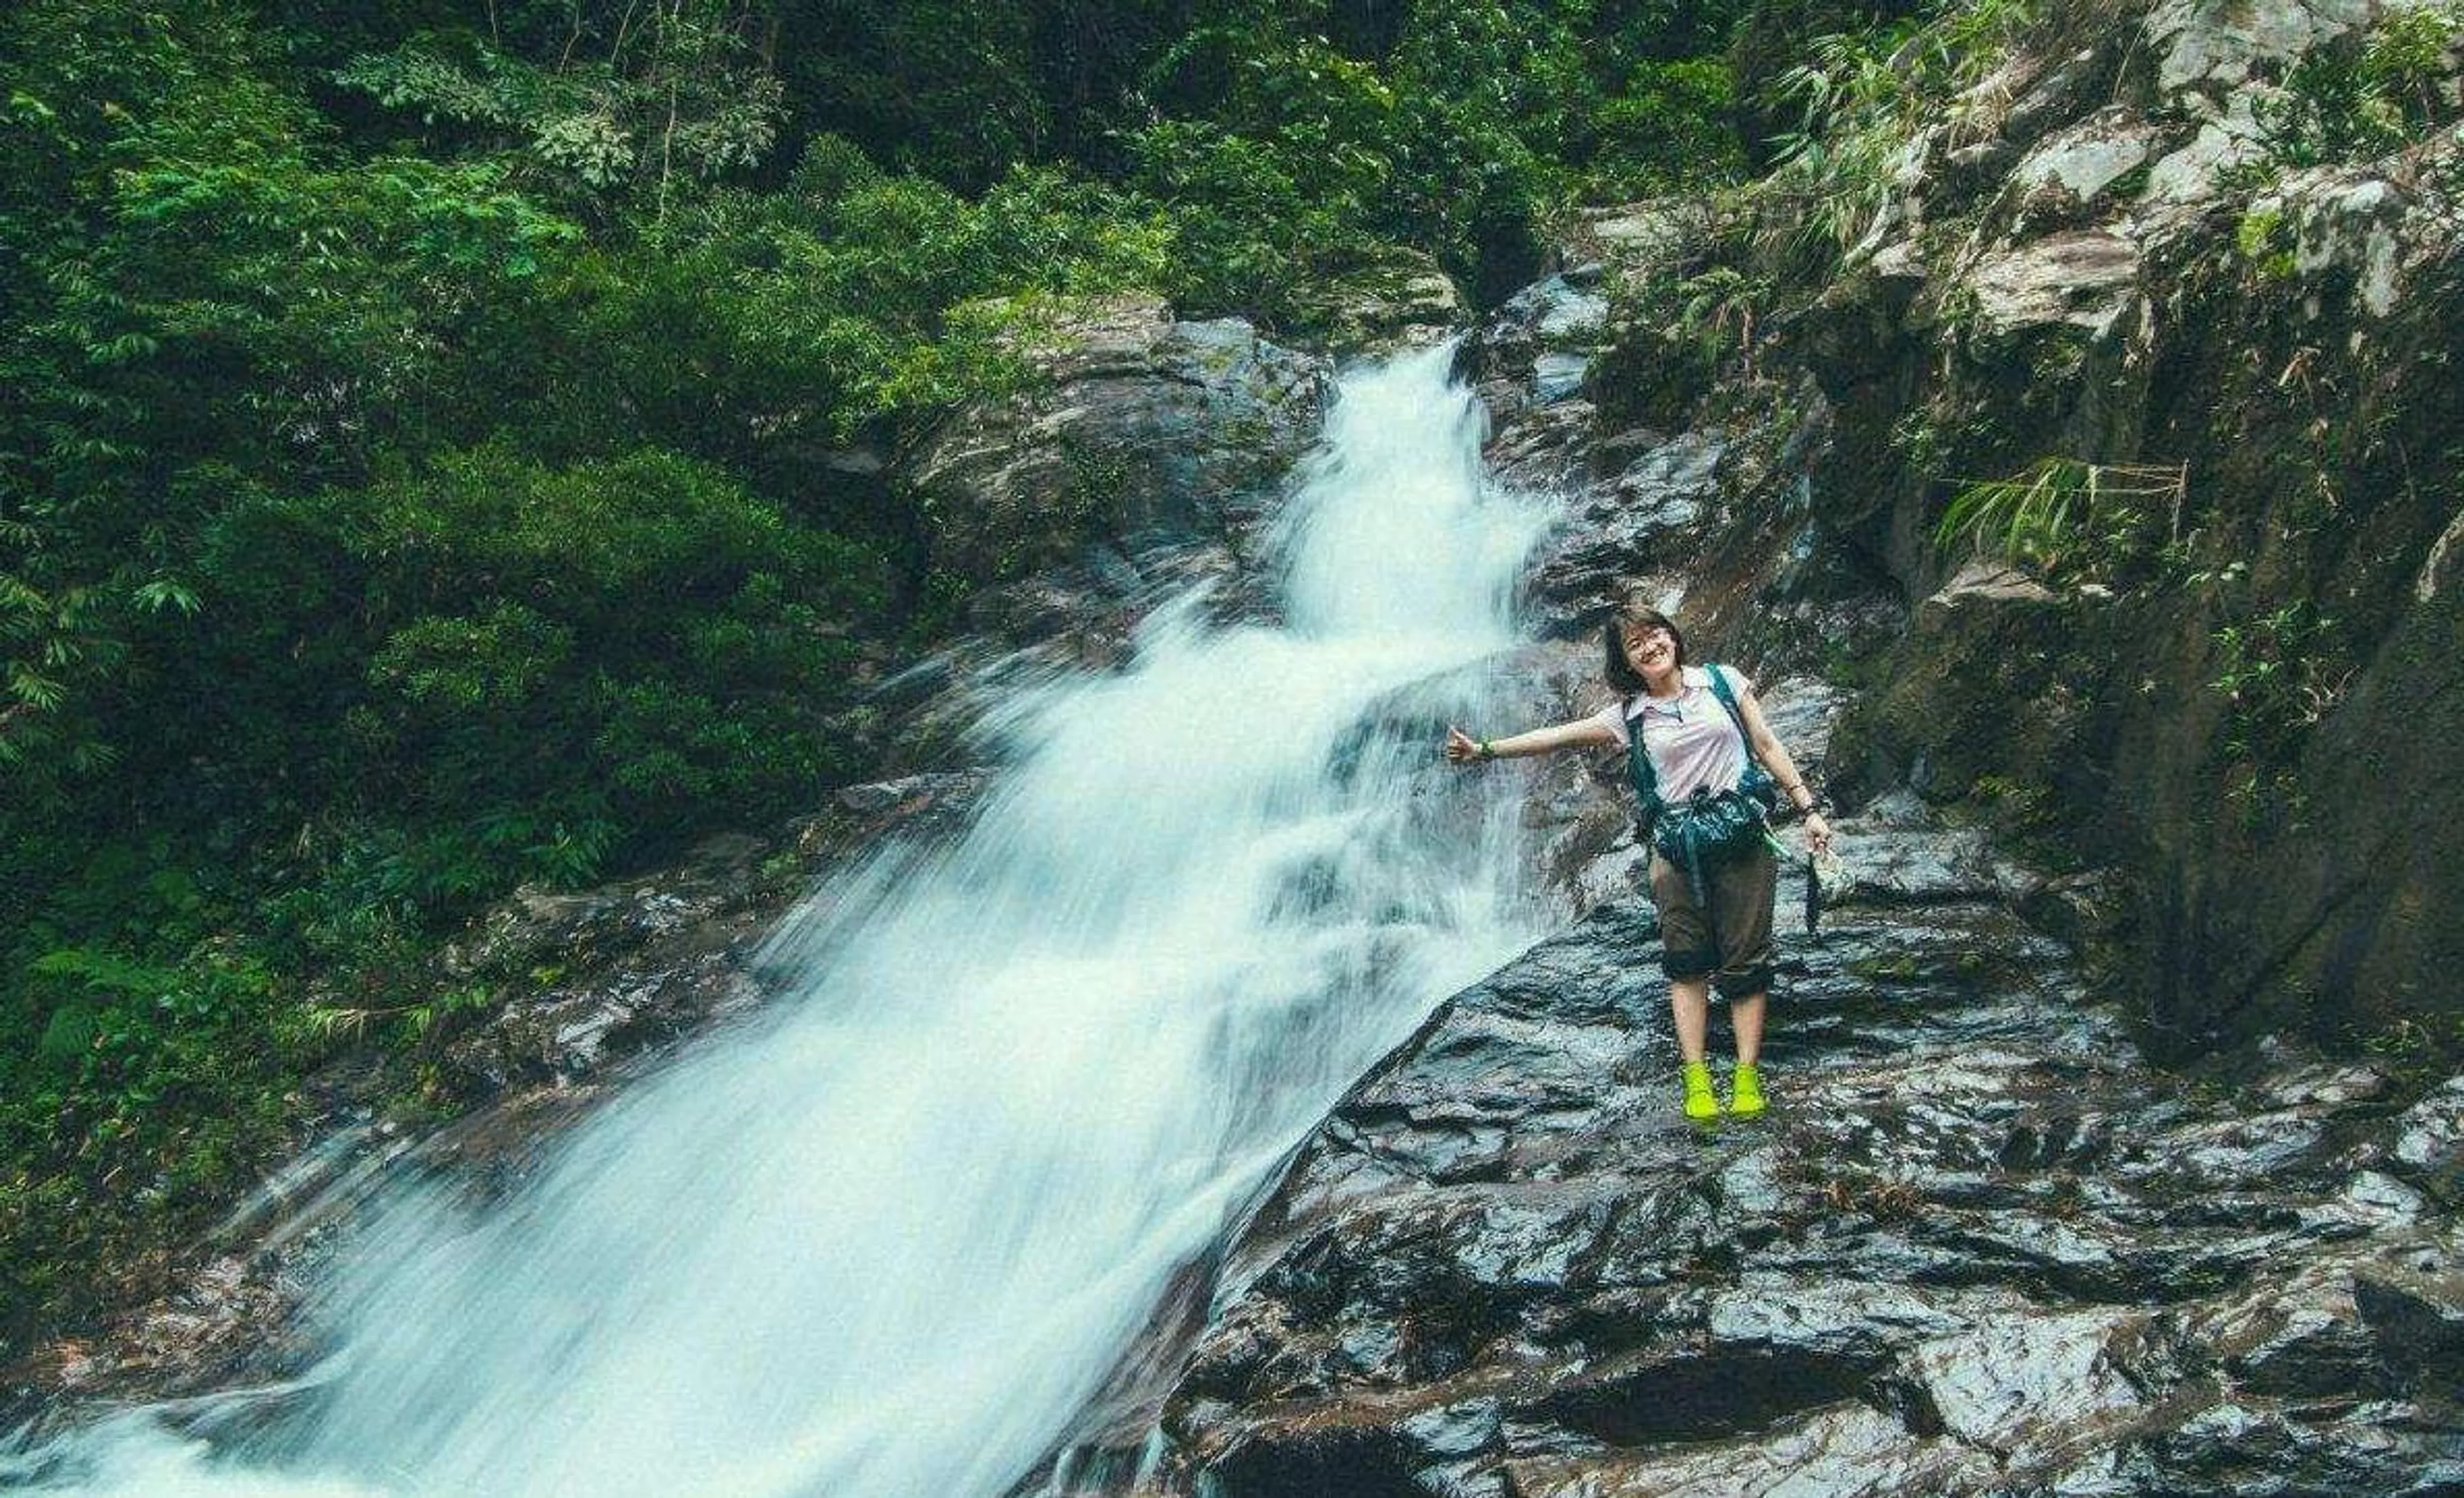 Explore Ba Do Phot waterfall - A trekking destination not to be missed